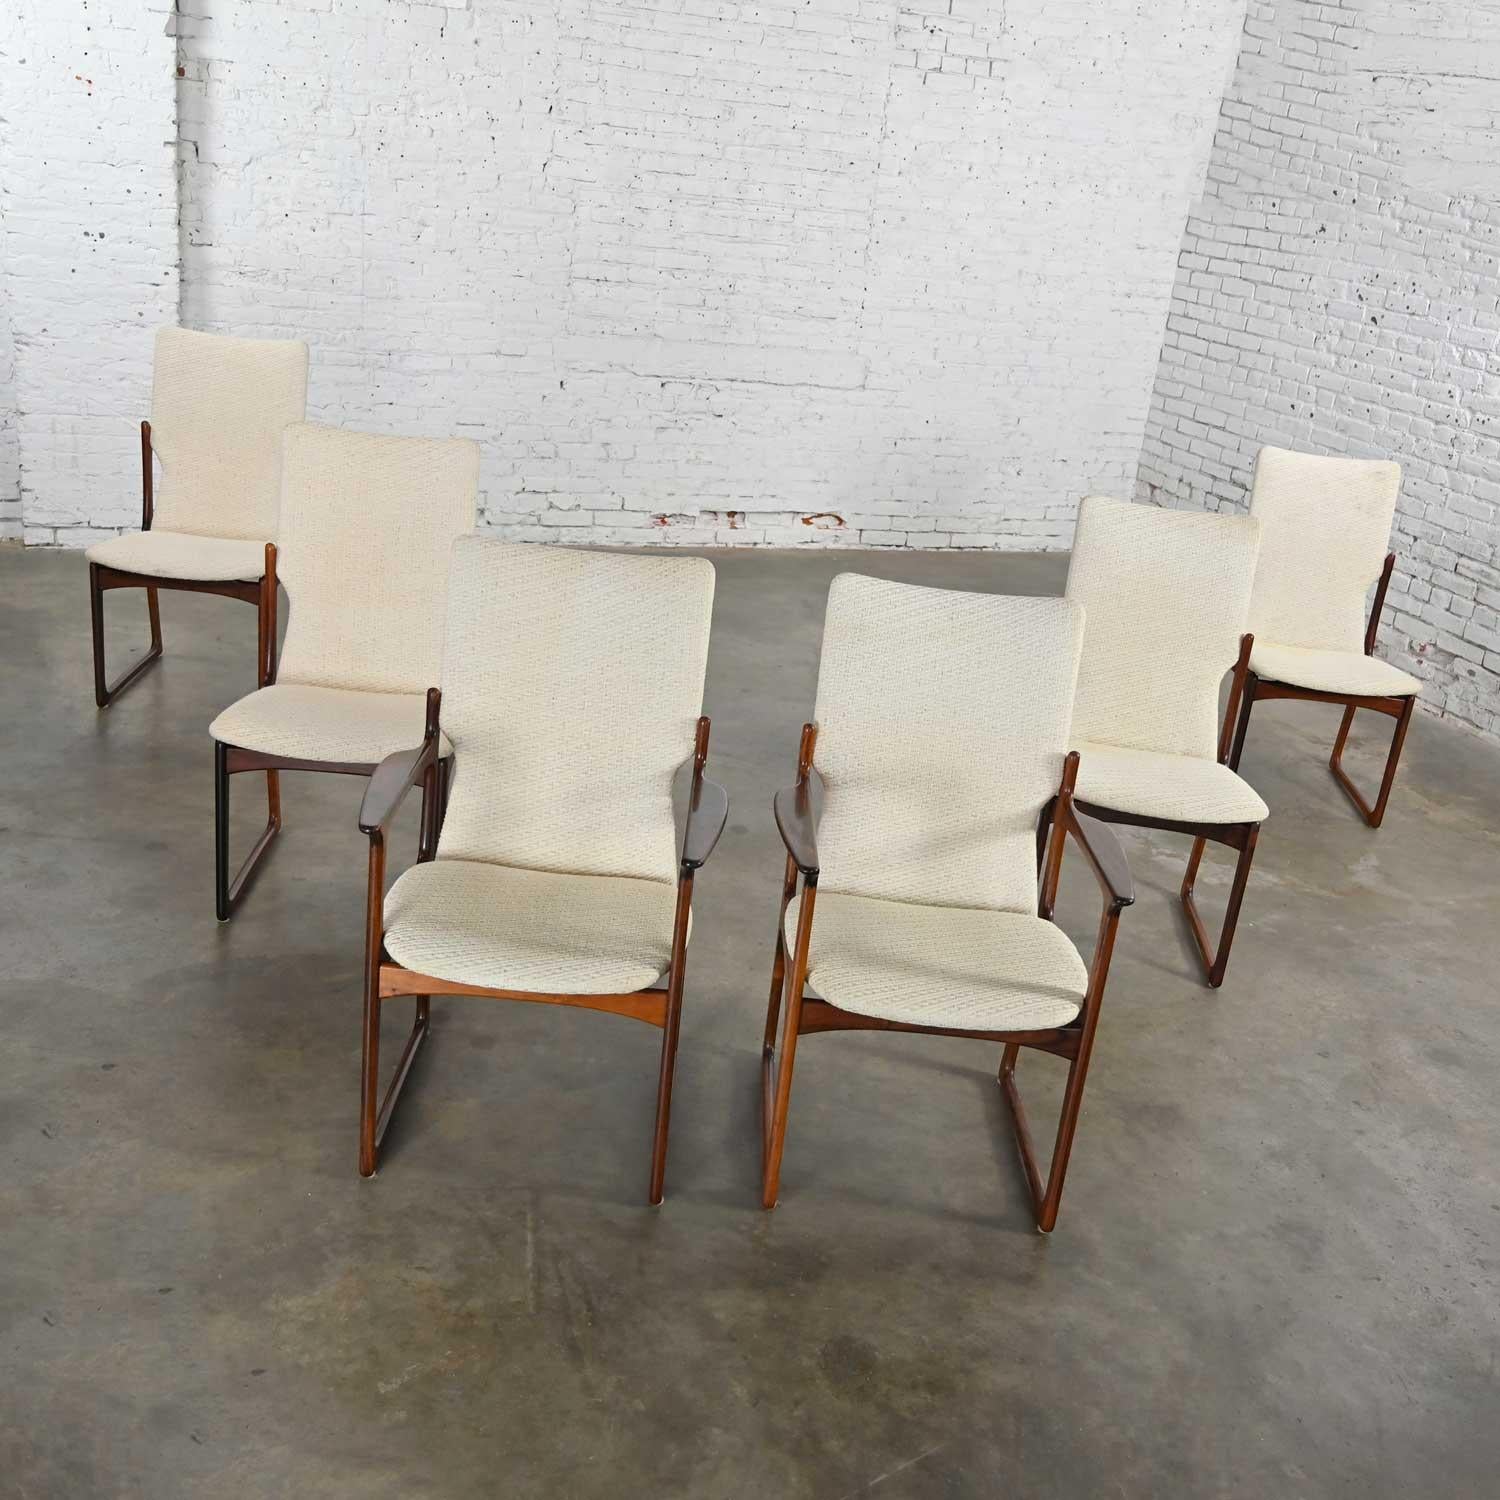 20th Century Scandinavian Modern Danish Rosewood Dining Chairs by Art Furn Set of 6 For Sale